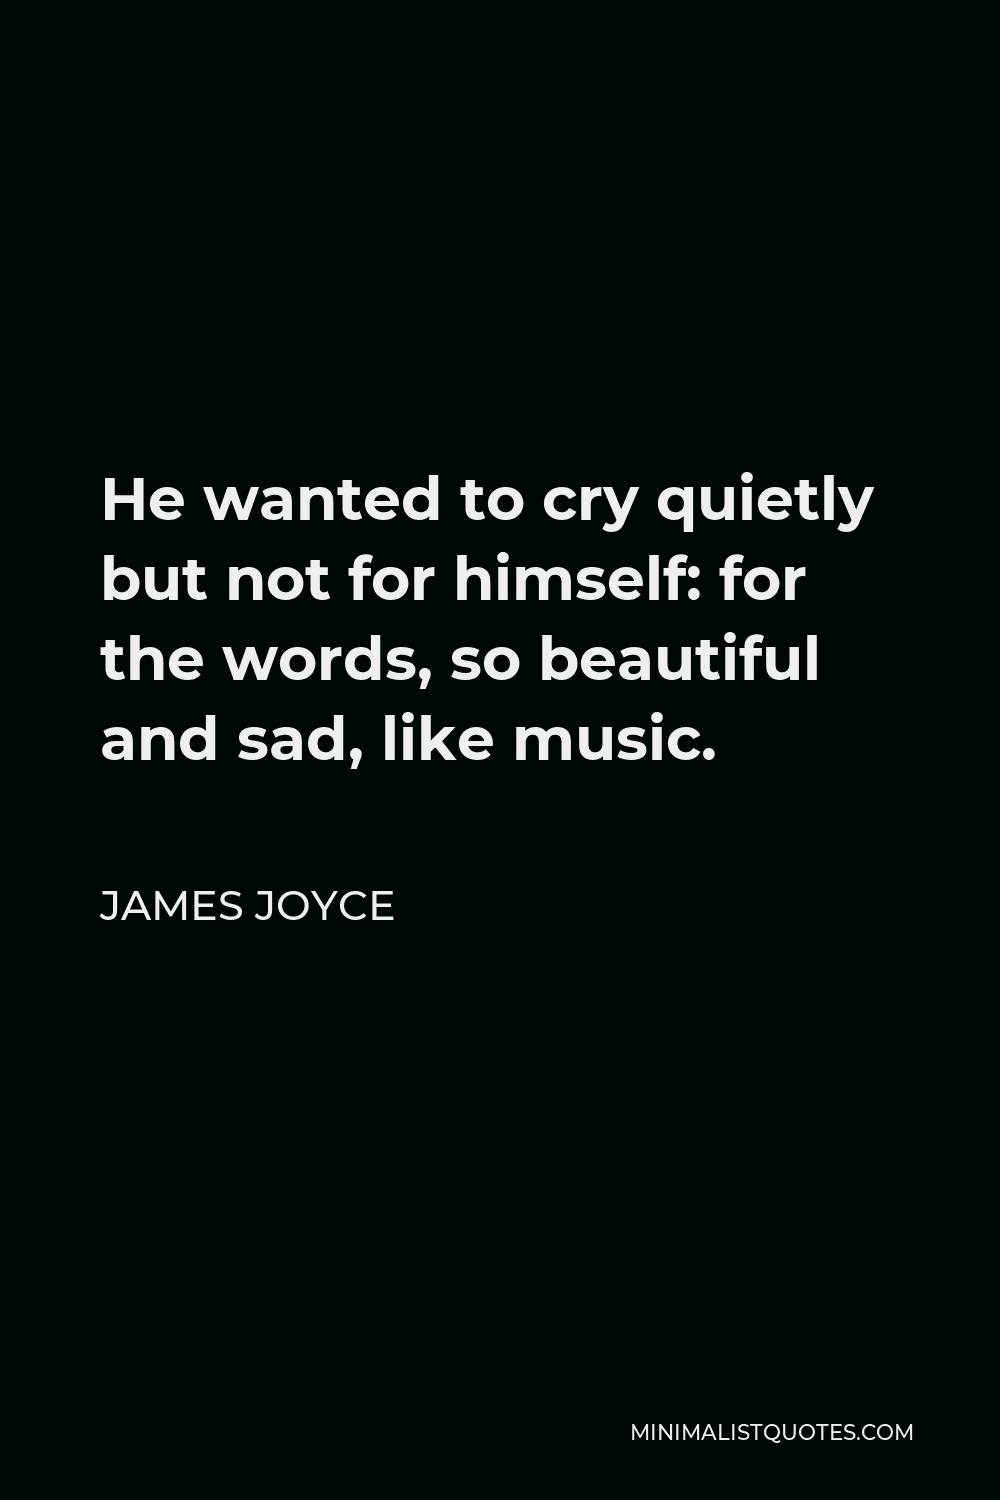 James Joyce Quote: He wanted to cry quietly but not for himself ...